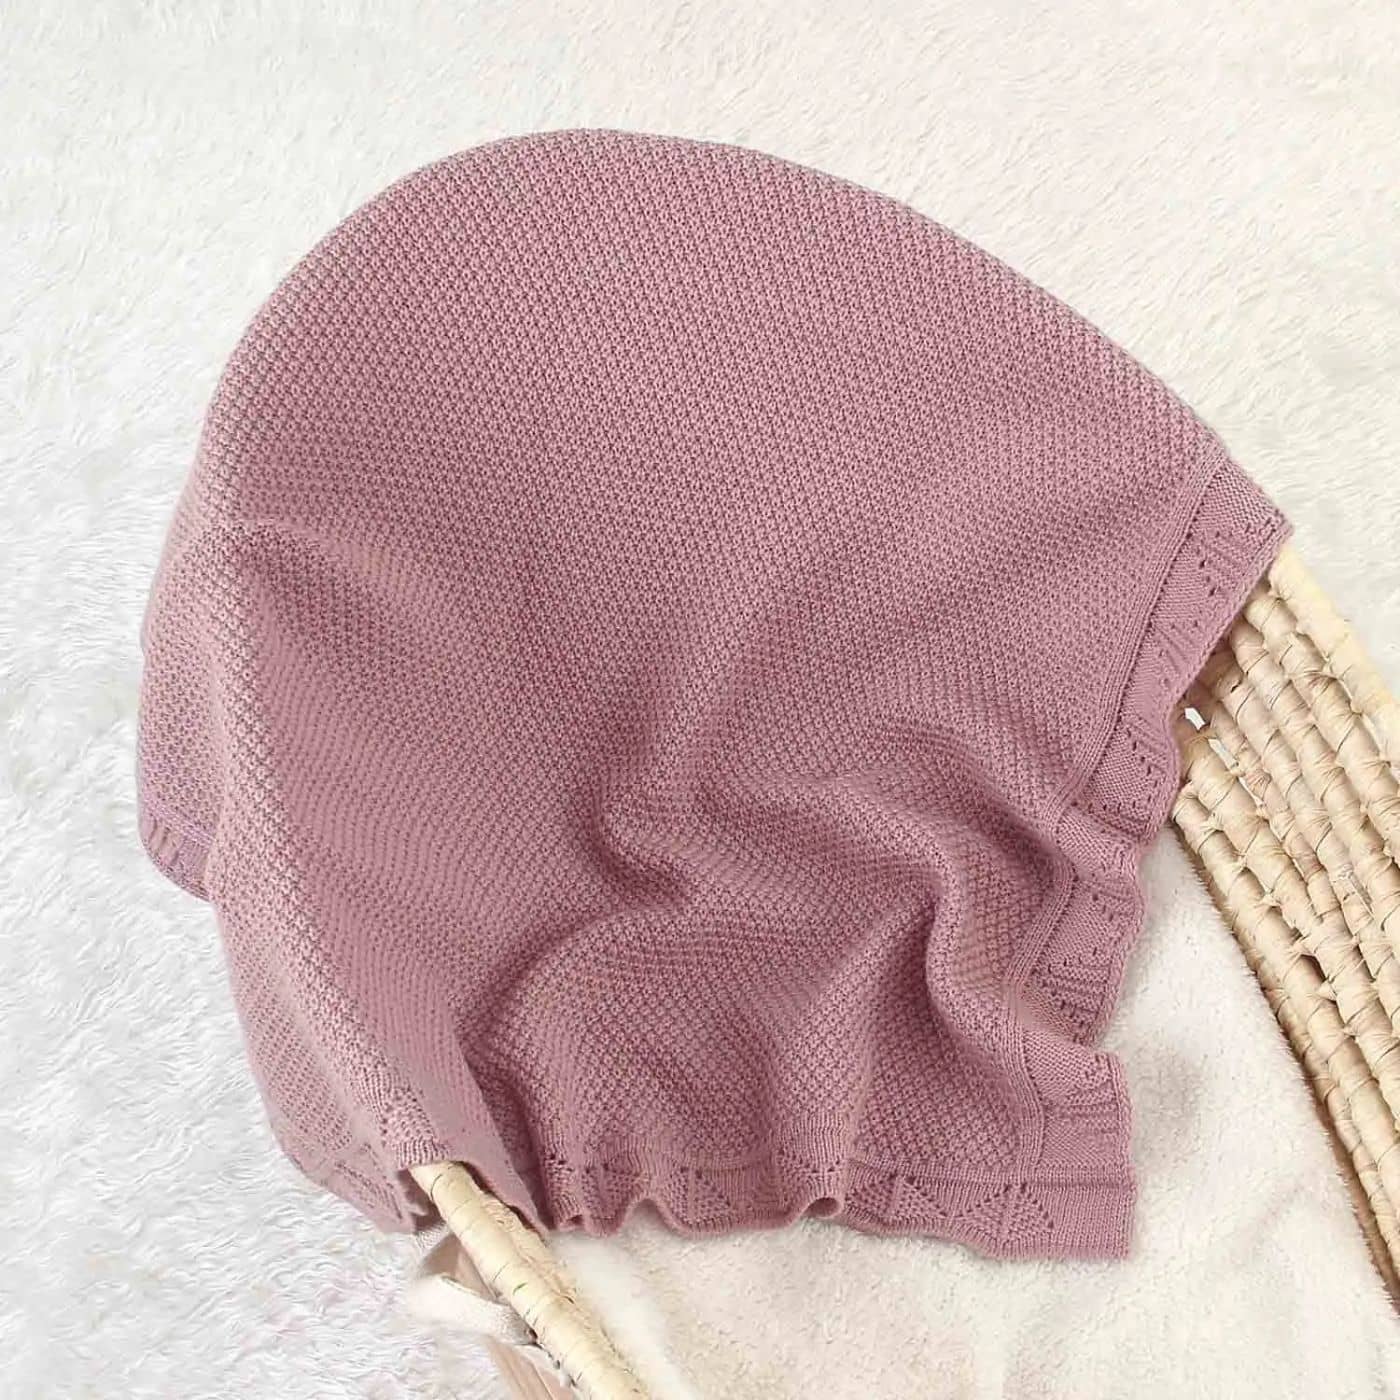 Couverture-bebe-tricot-rose